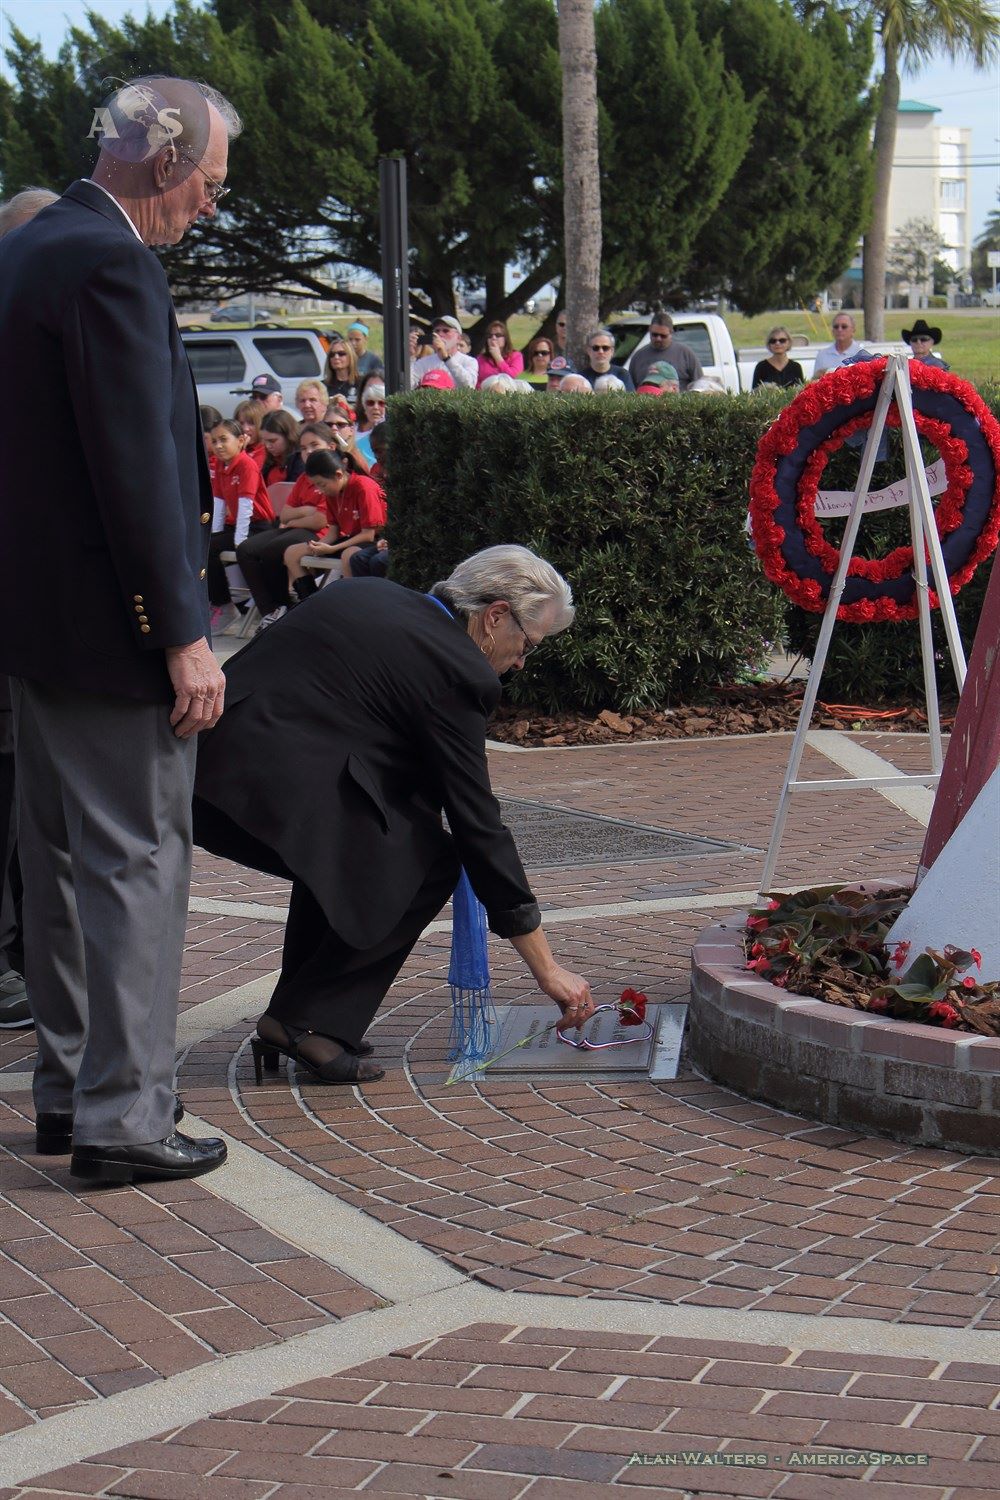 A local member of the community places a flower on Roger B. Chaffee's plaque, who died in the Apollo 1 flash fire on Jan. 27, 1967. Photo Credit: Alan Walters / AmericaSpace